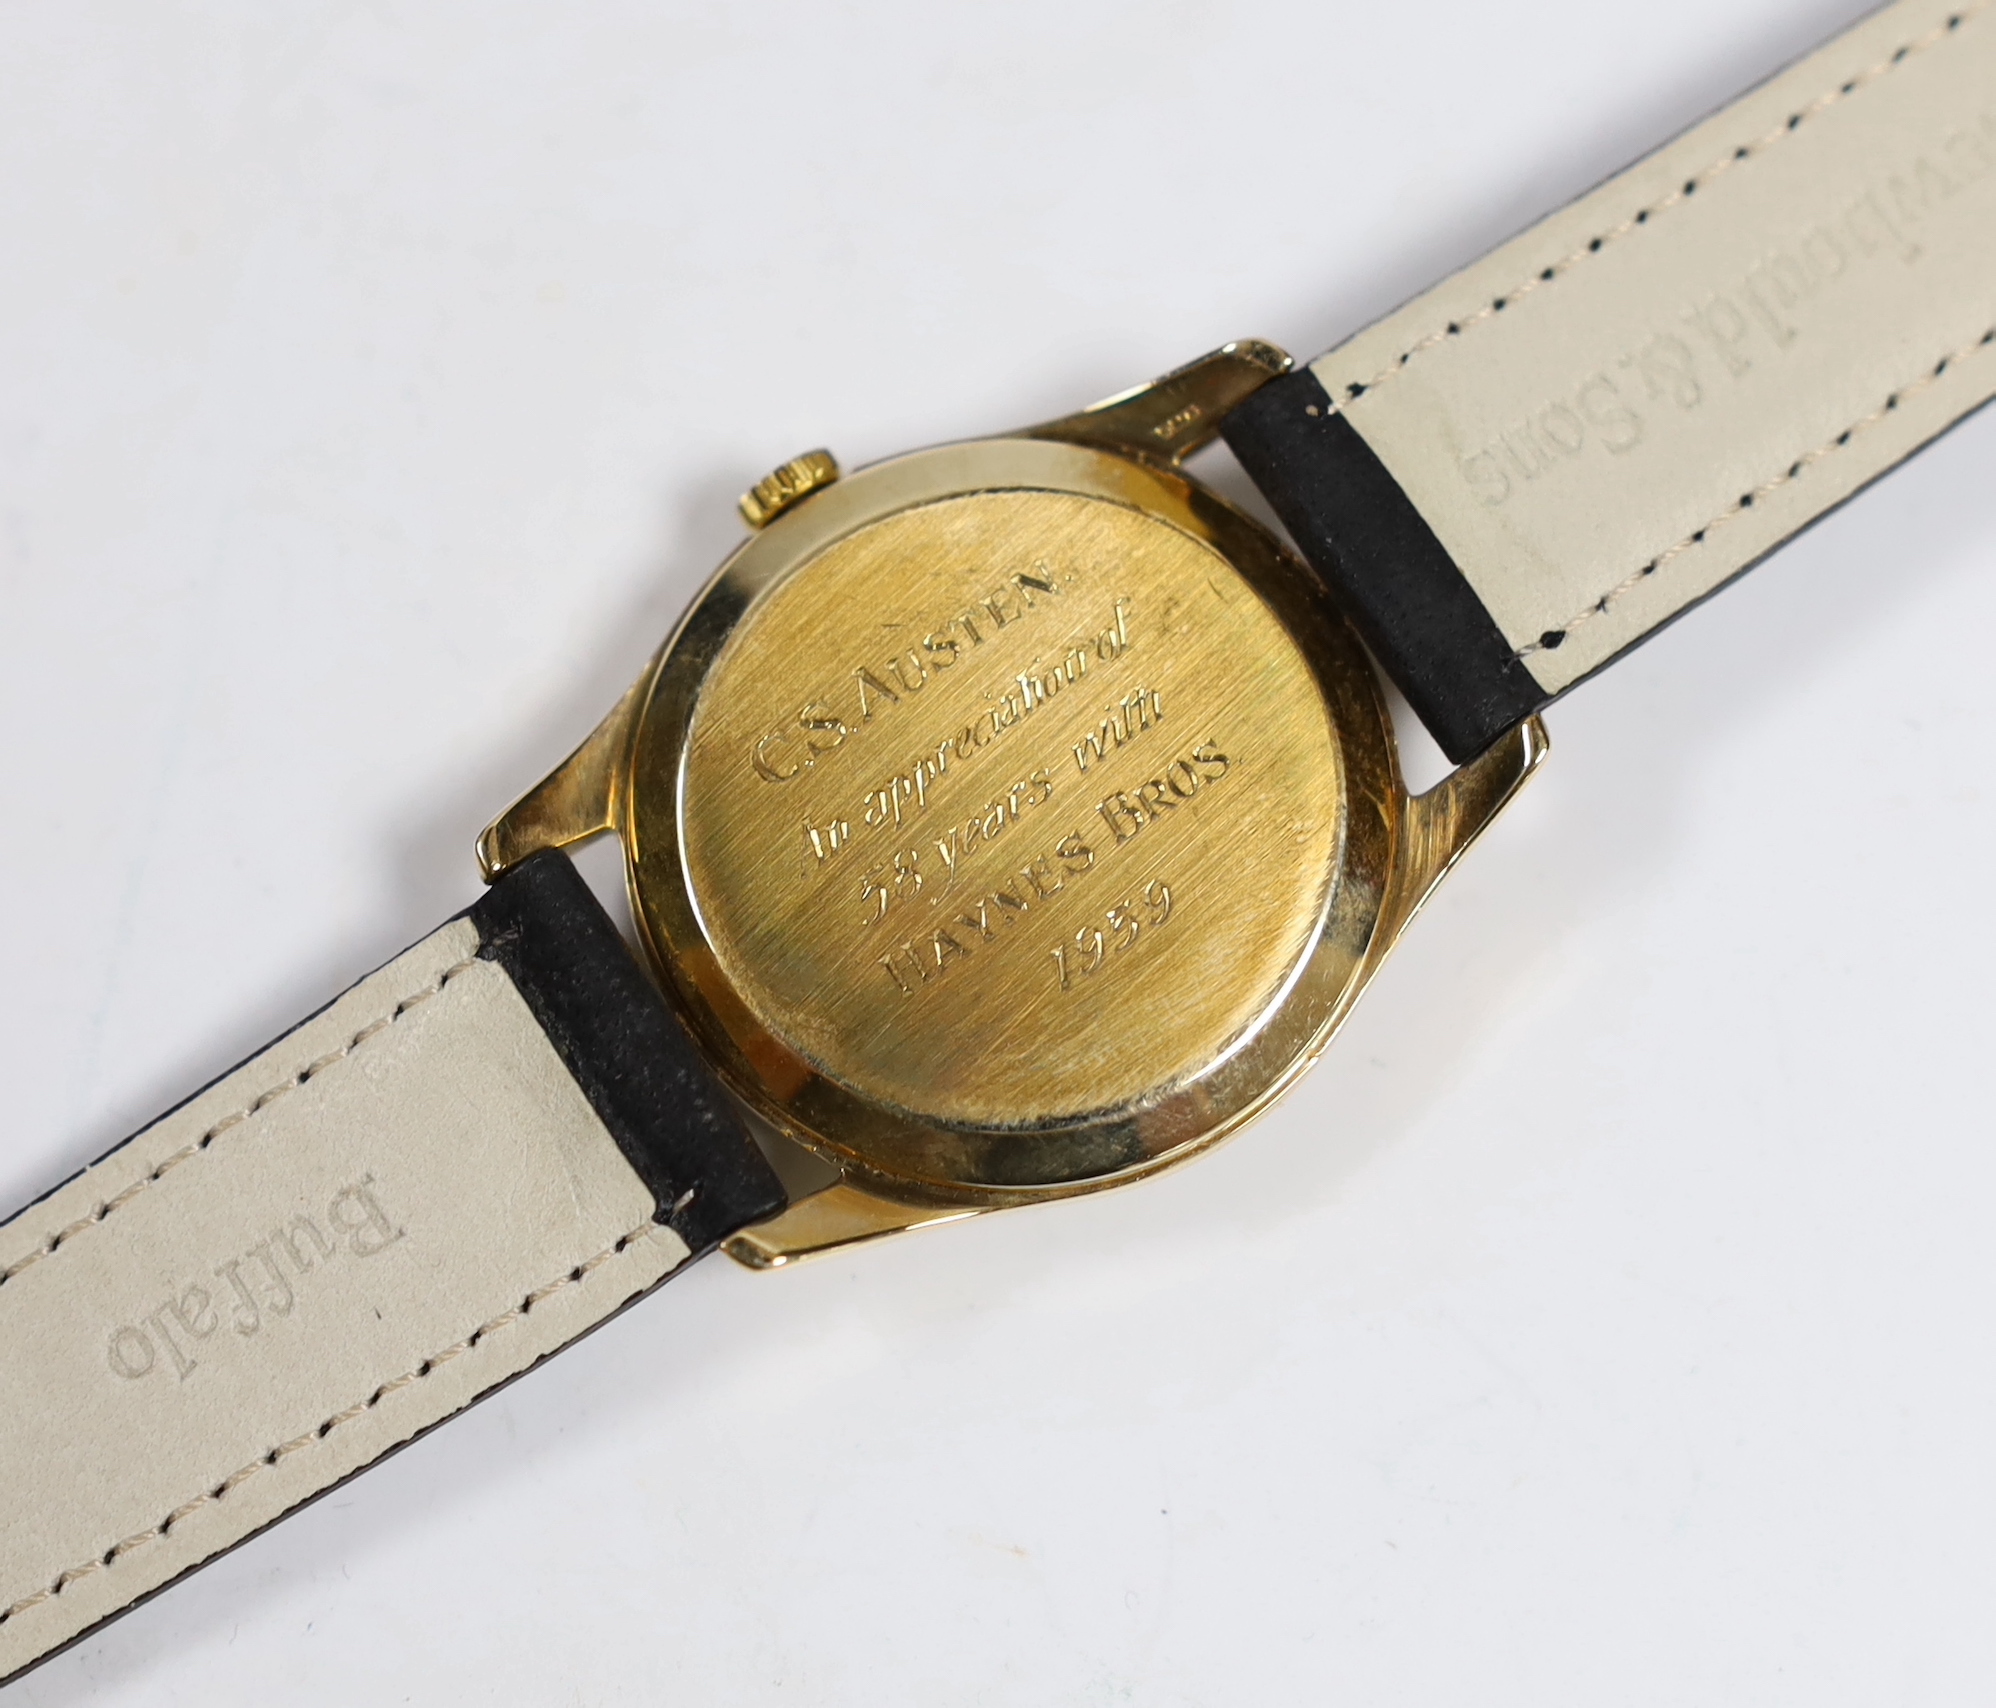 A gentleman's 9ct gold Omega manual wind wrist watch, with case back inscription, on associated leather strap, case diameter 34mm.